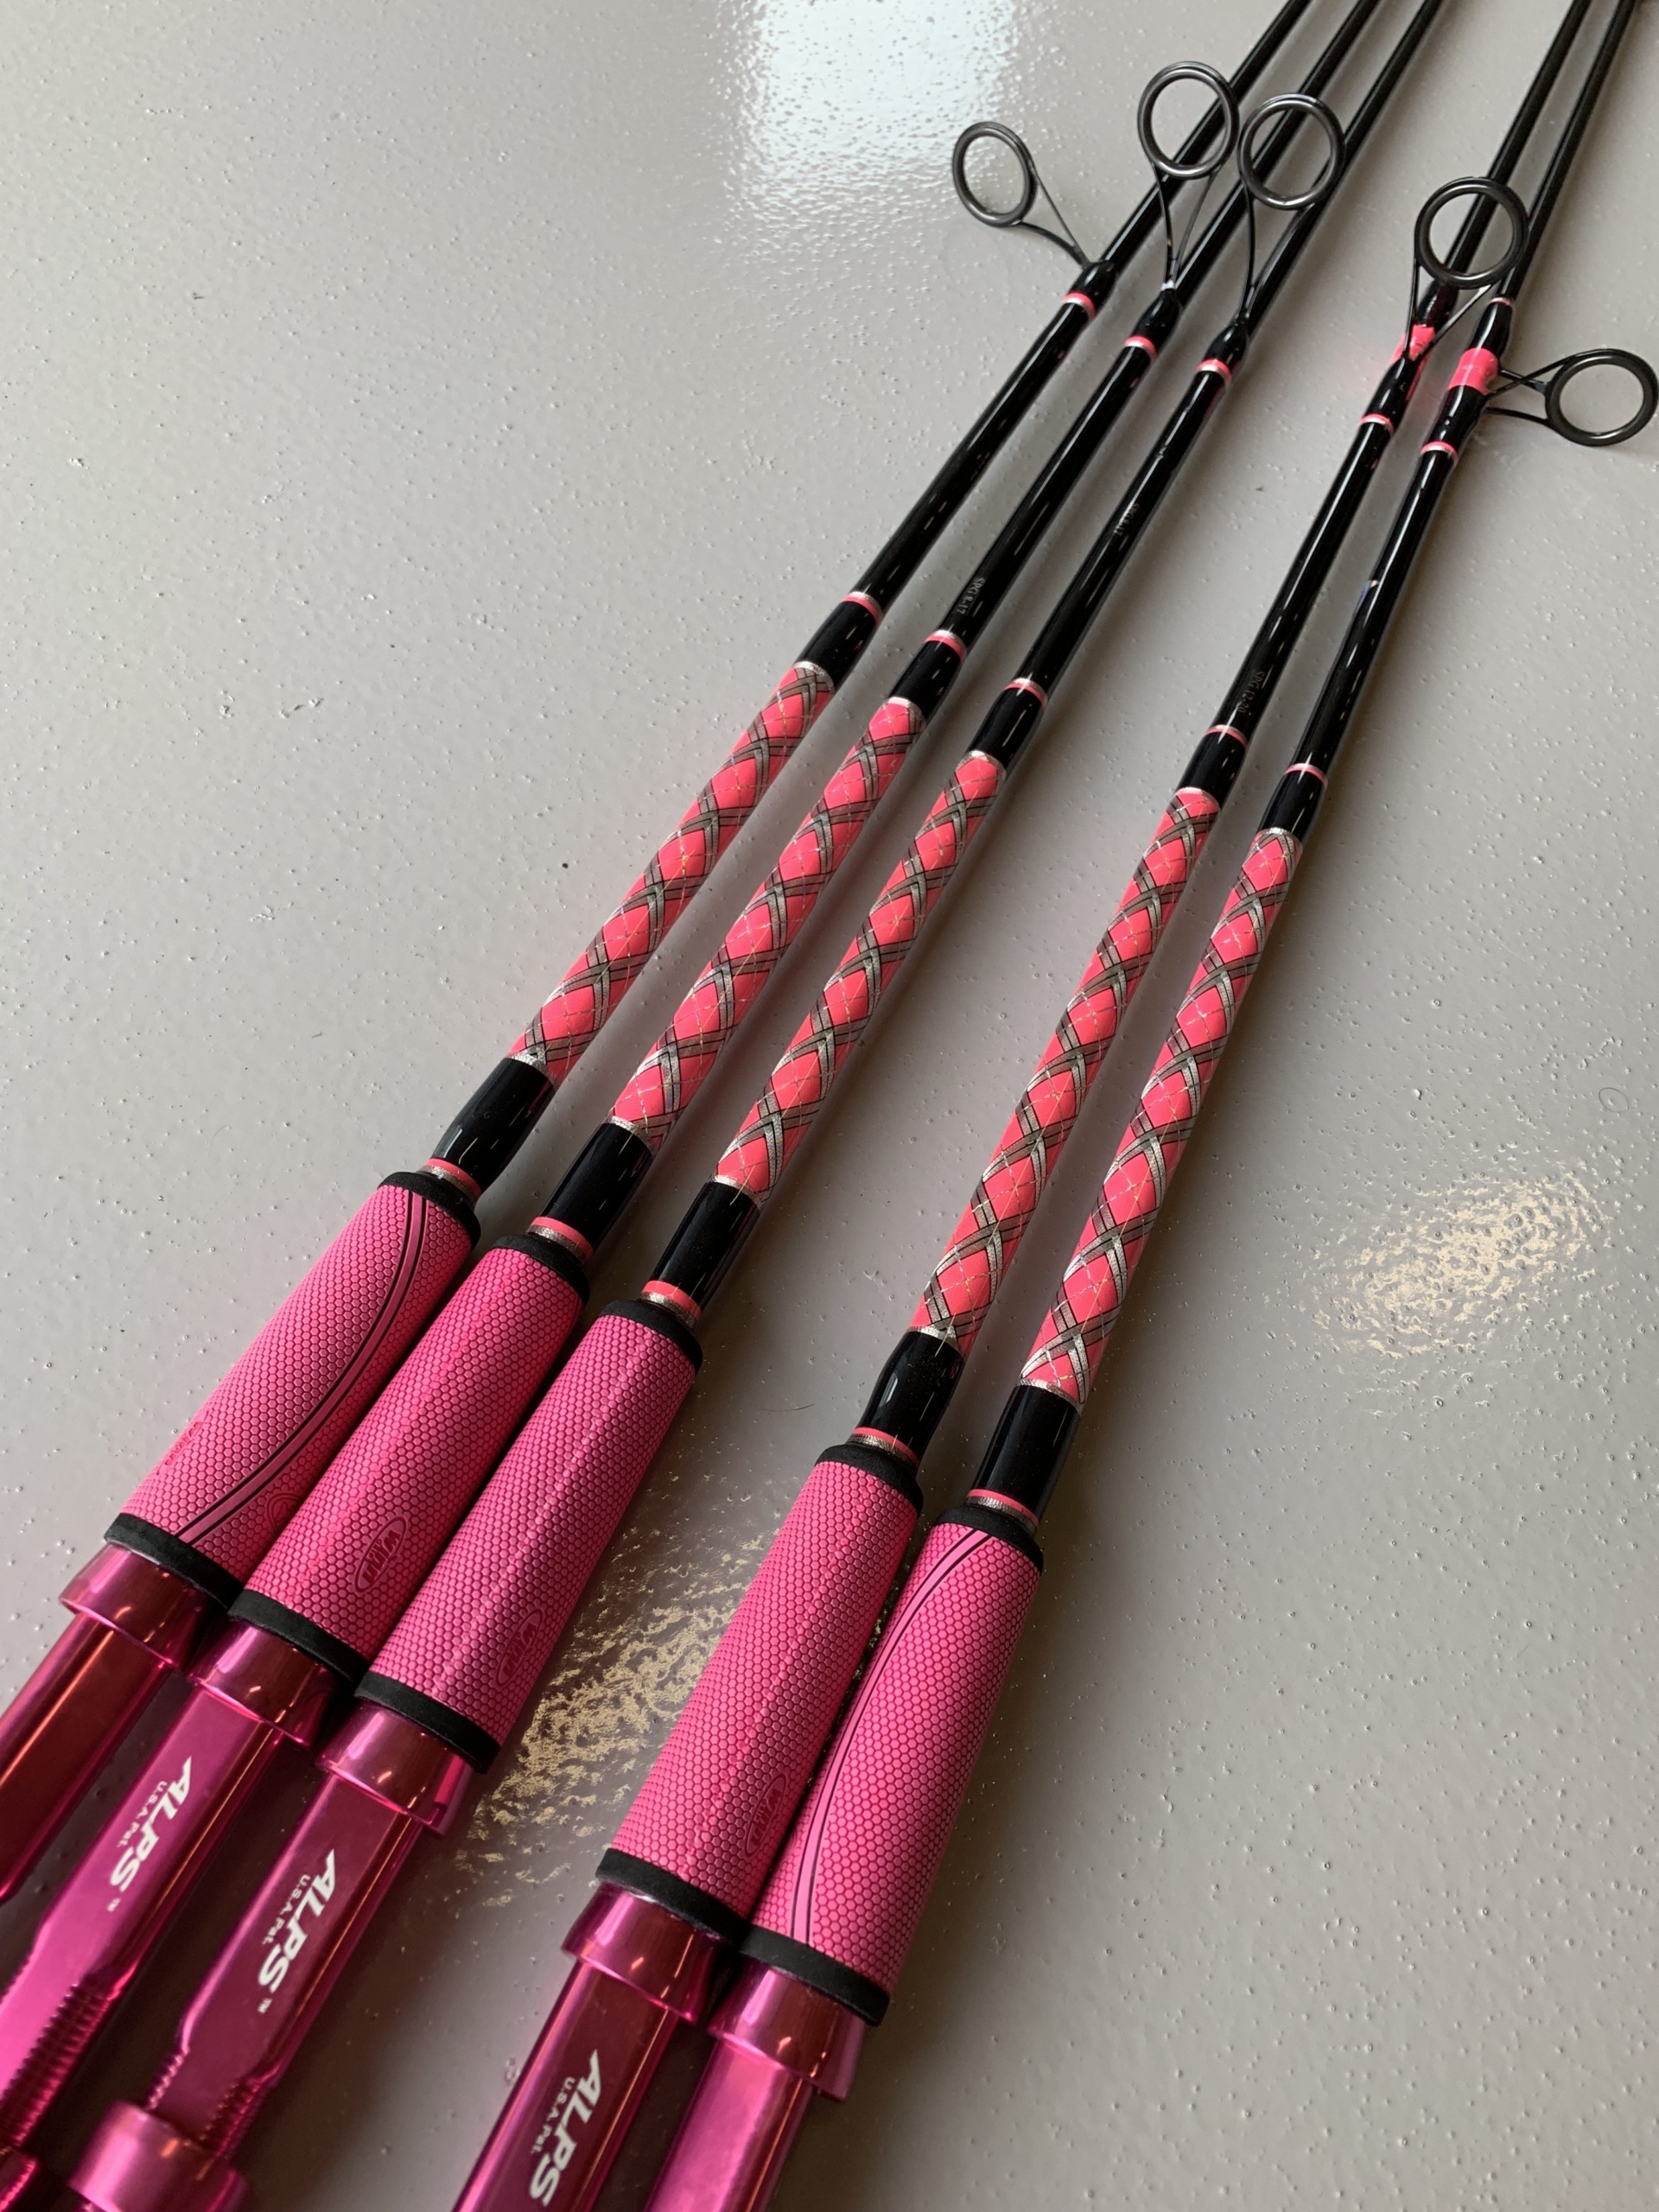 Pink Fishing Rods Really? What girl doesn't love Bling? - HubPages